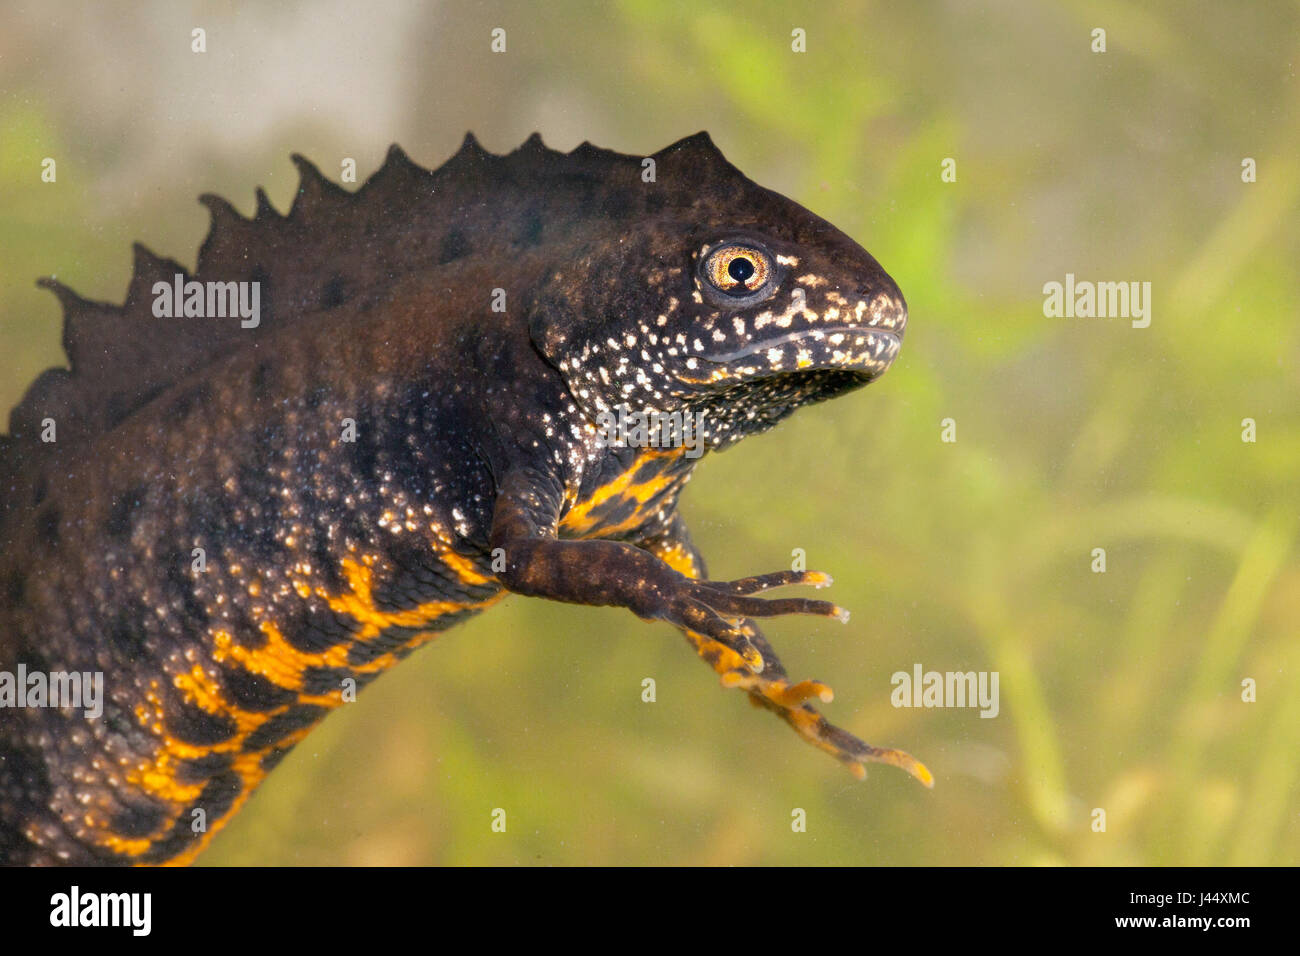 Portrait of a male great crested newt underwater photographed from the side with a green background Stock Photo